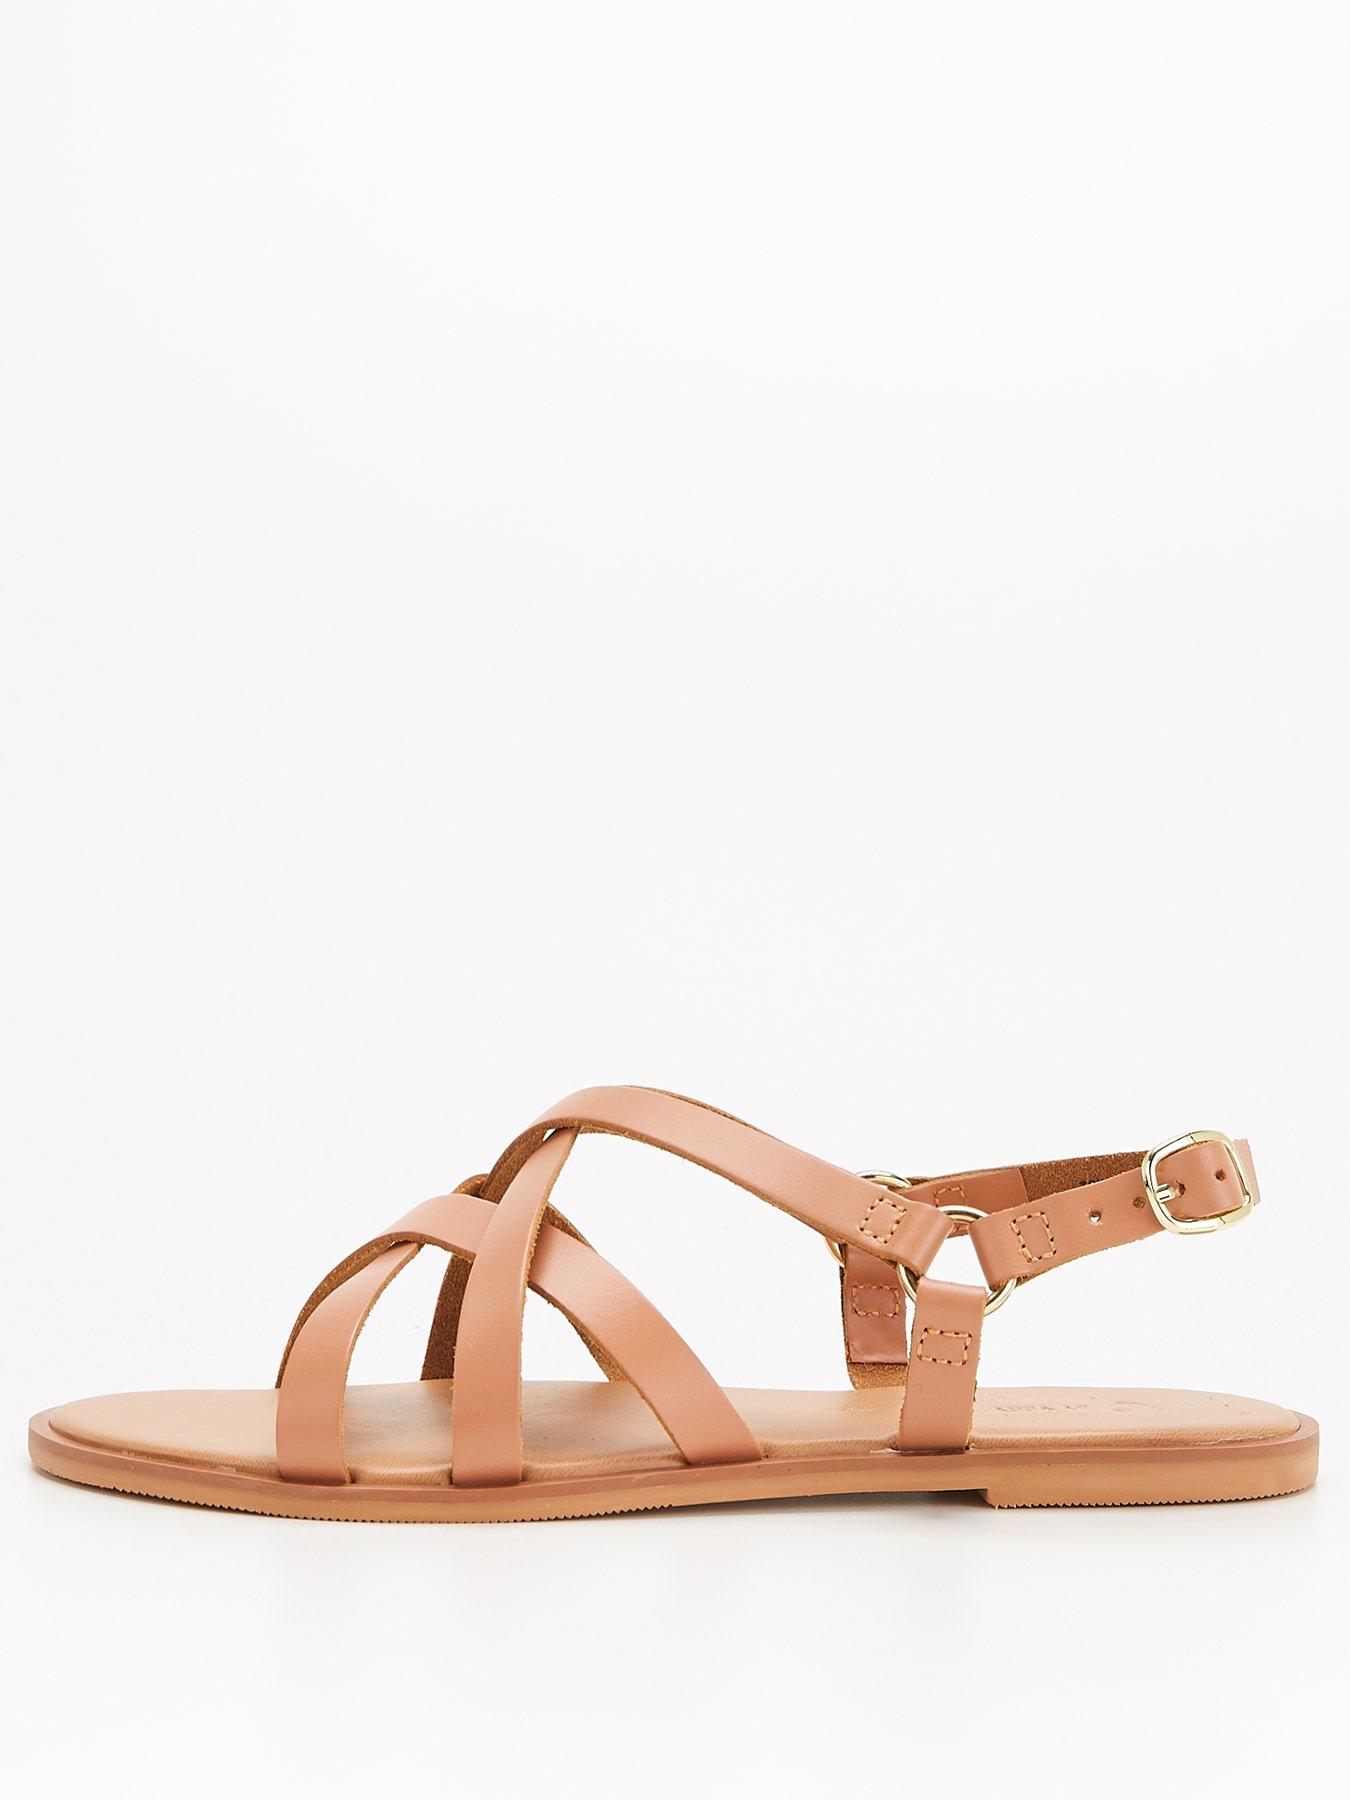 Shoes & boots Leather Strappy Sandal - Tan